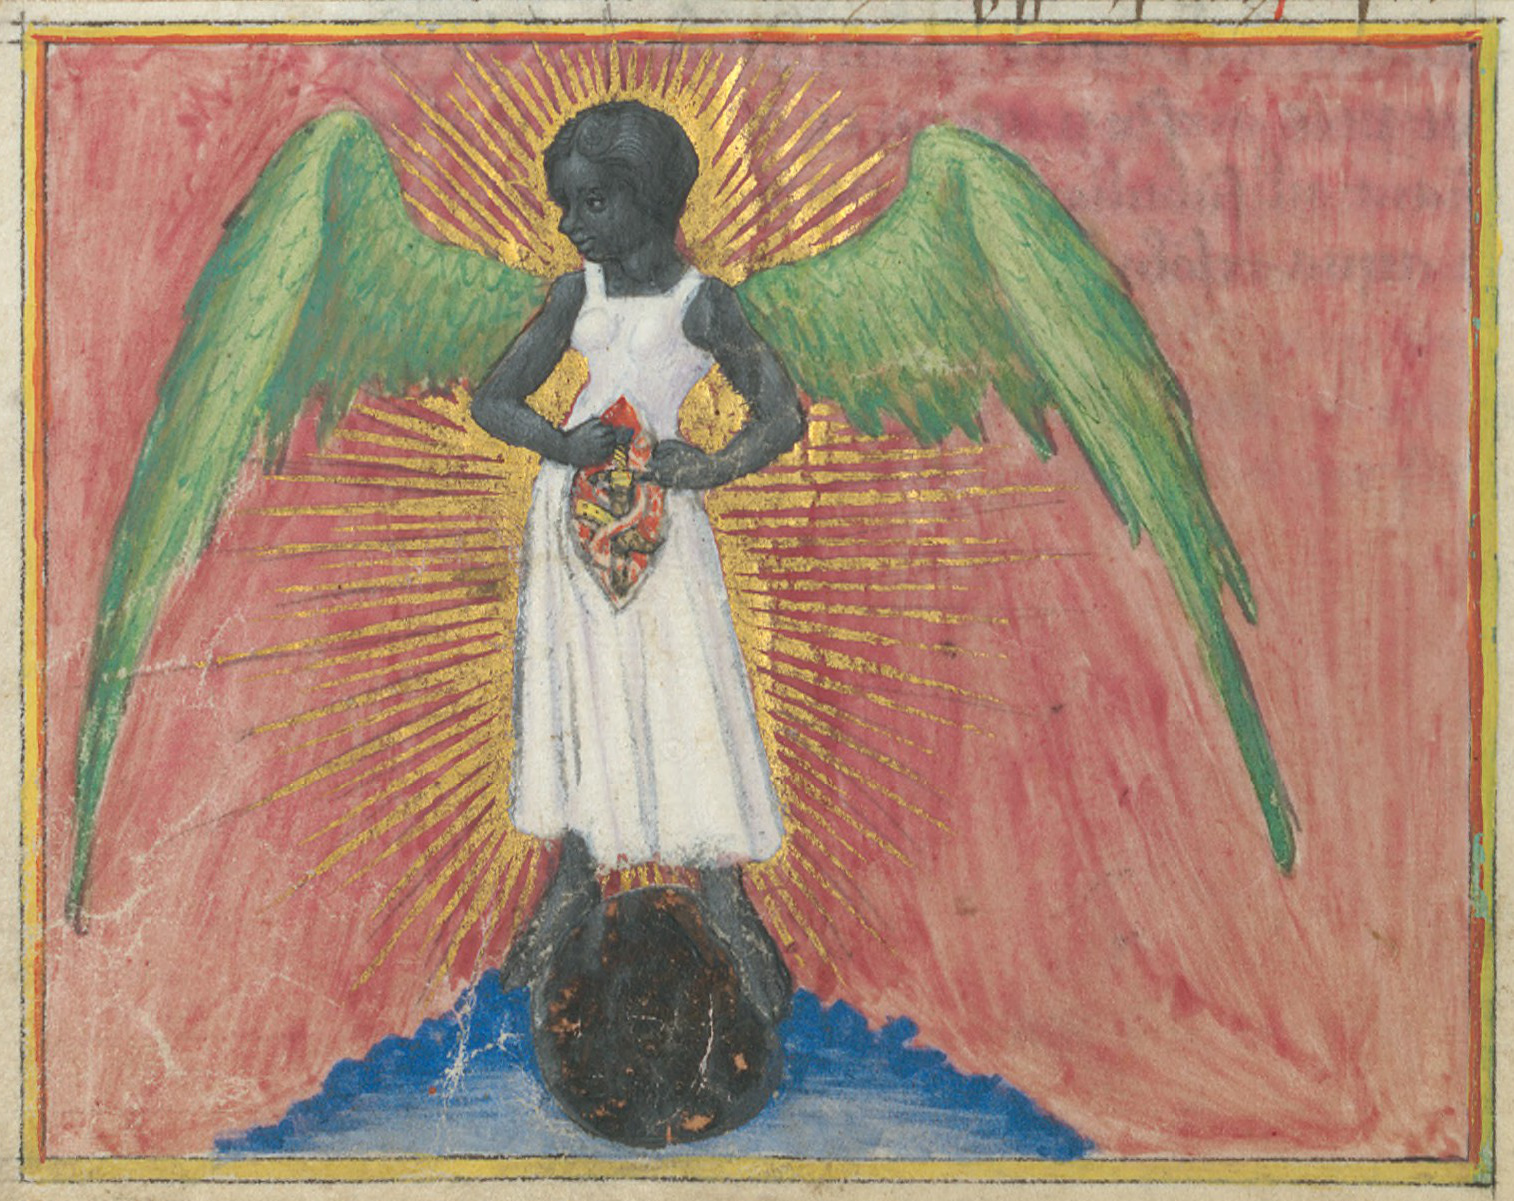 A stylized image of an angel with wings who holds an item.